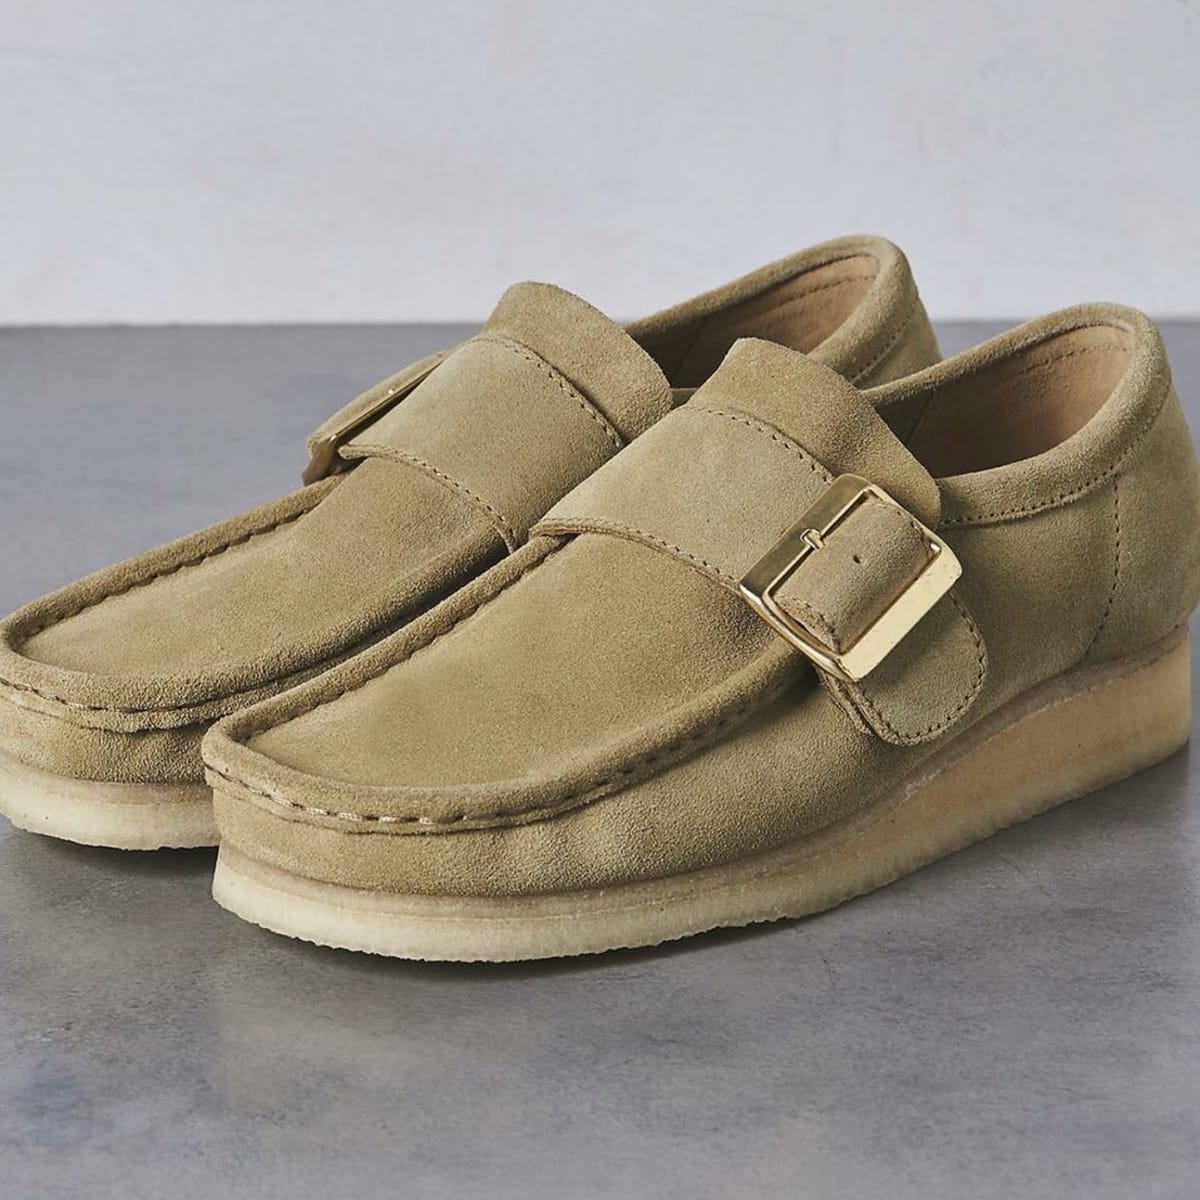 japanese clarks shoes